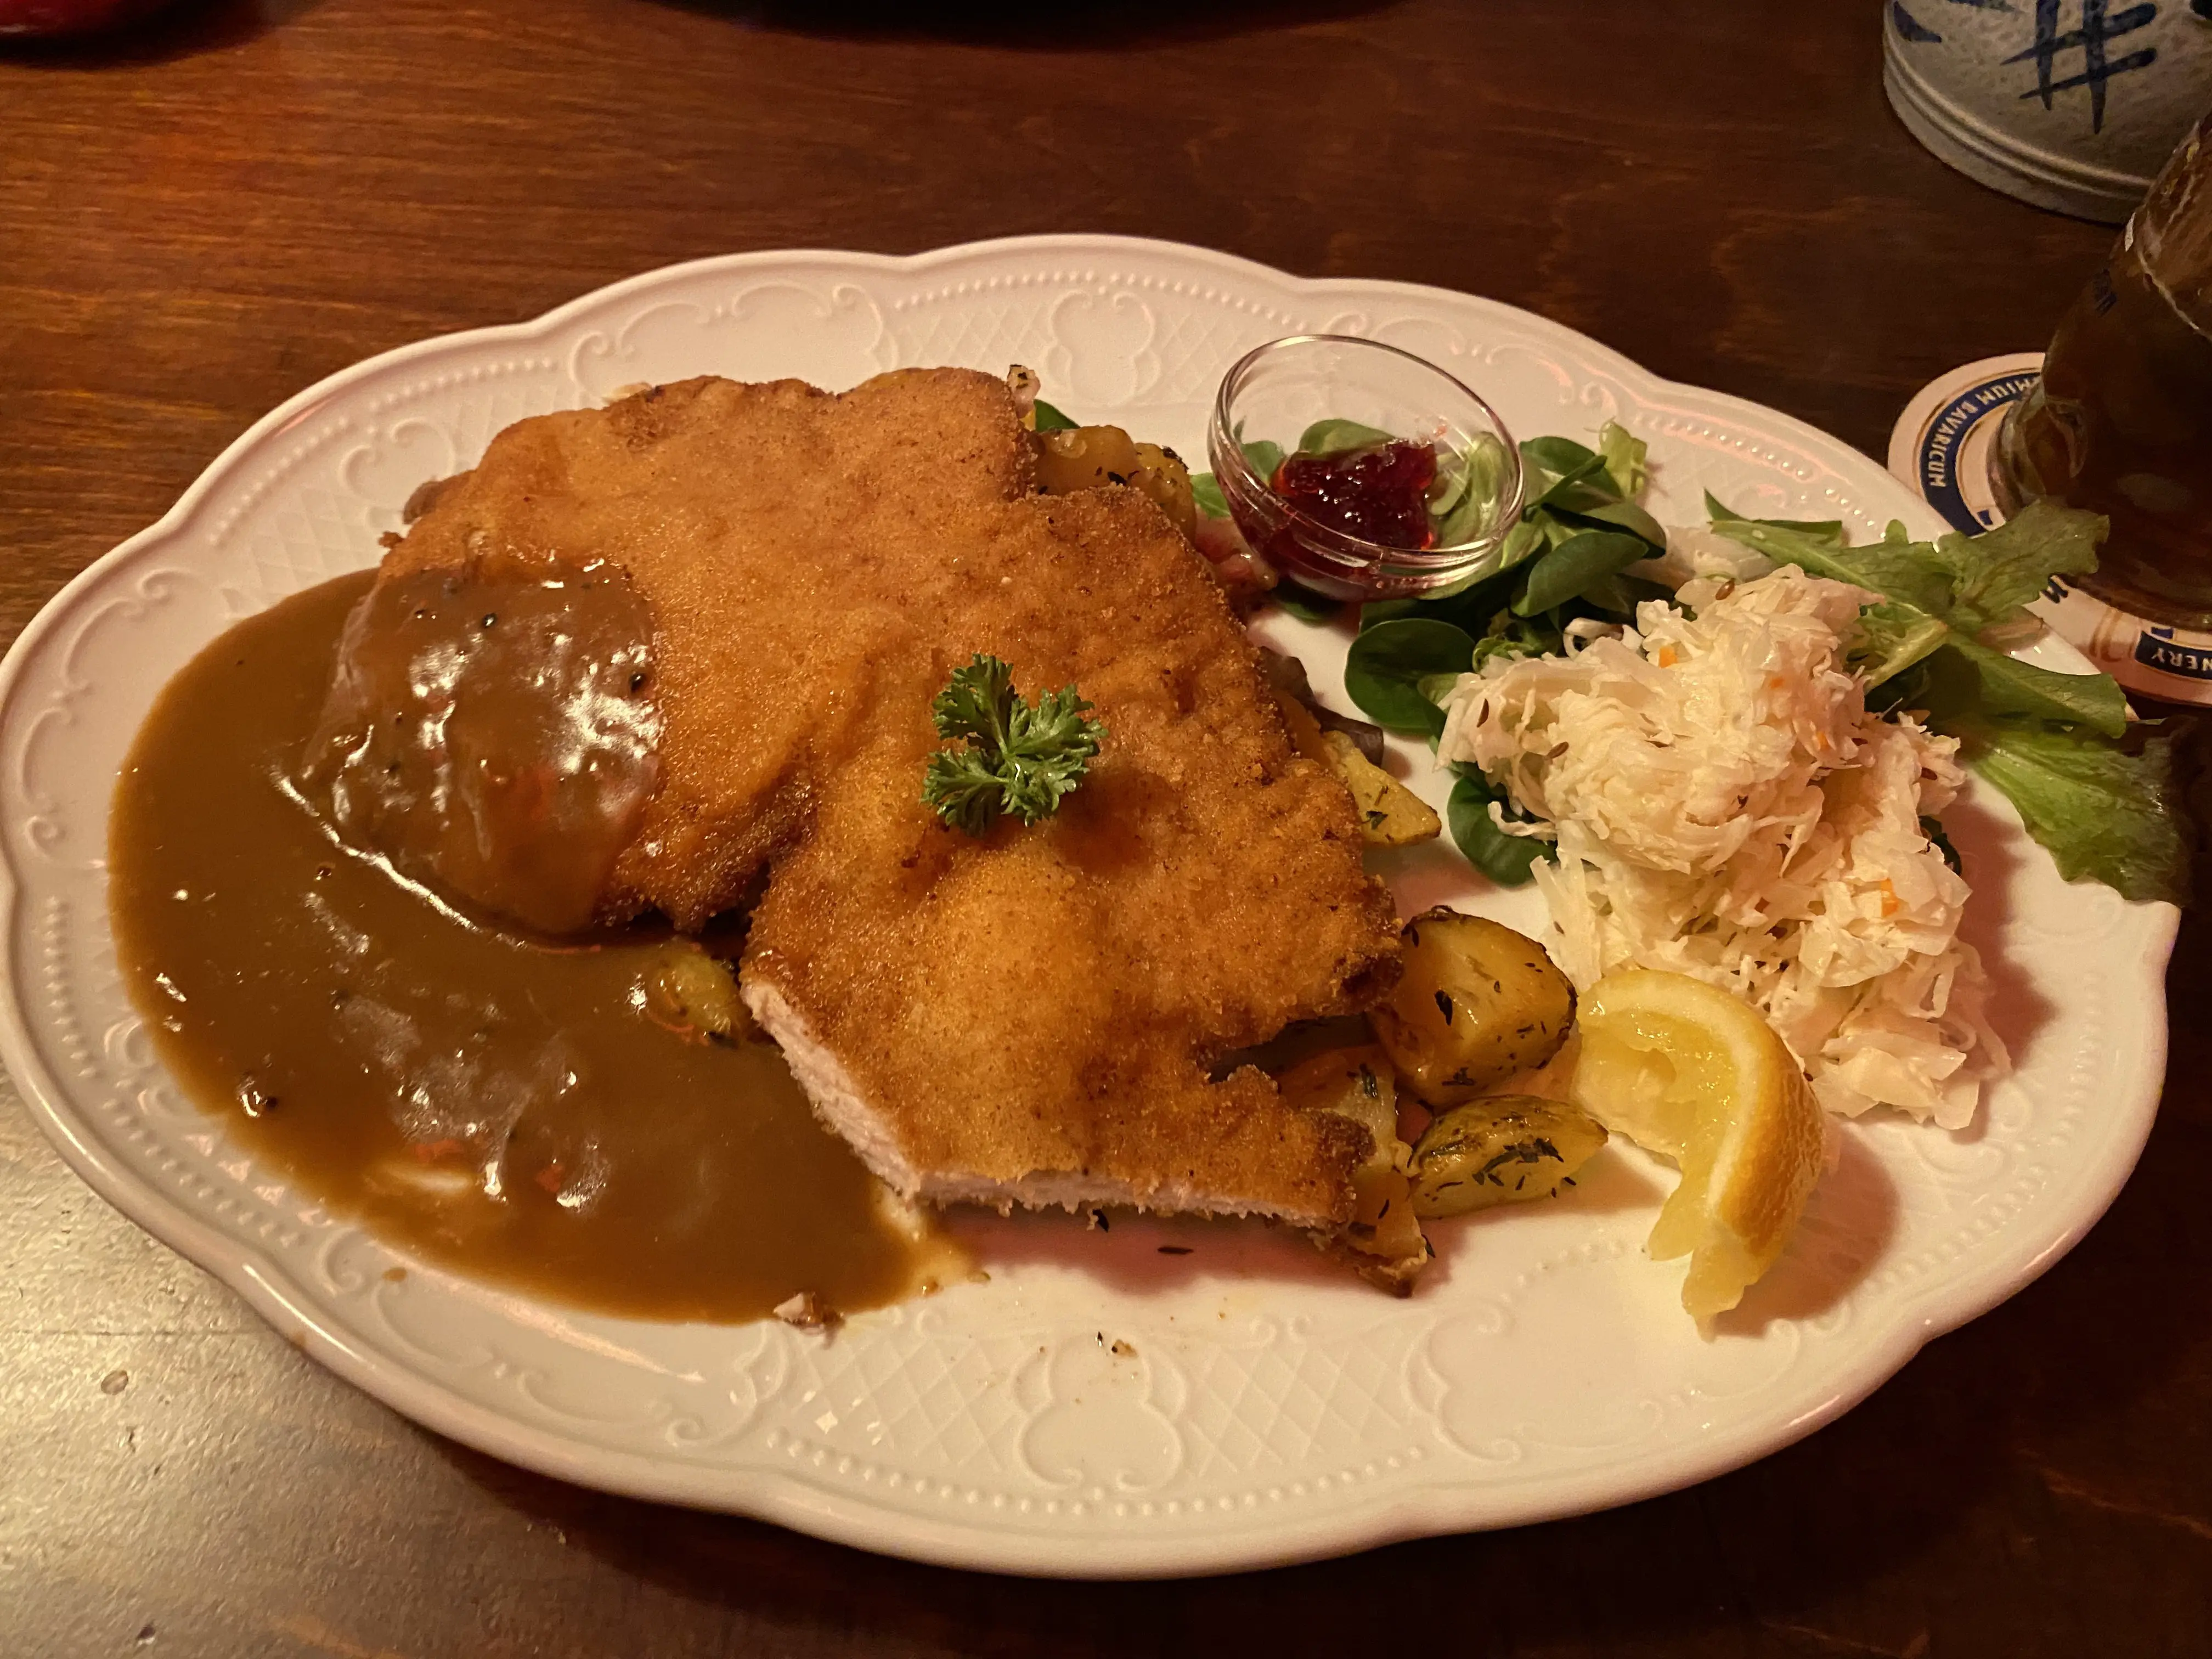 A picture of the food at the restaurant, a schnitzel with potatoes and salad